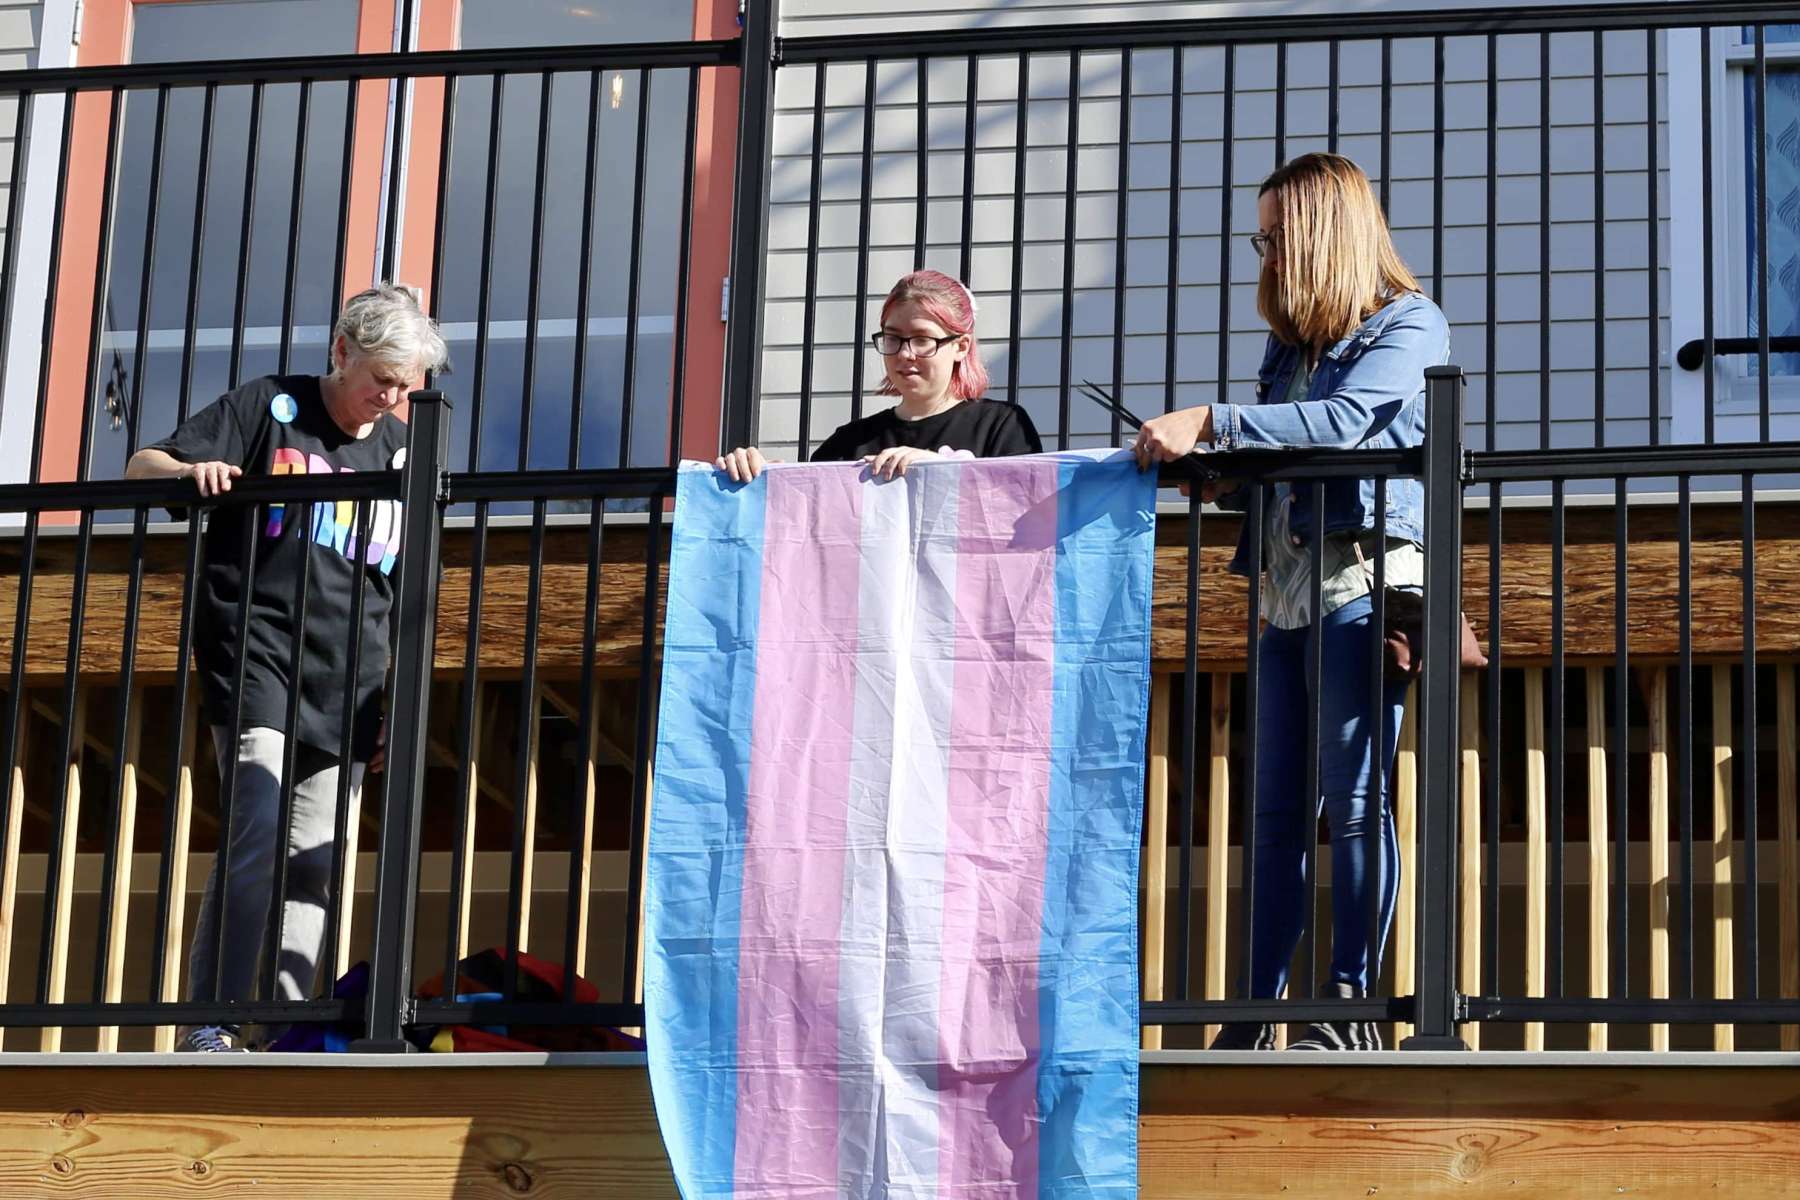 Trans Day of Joy Celebrated in South Kingston